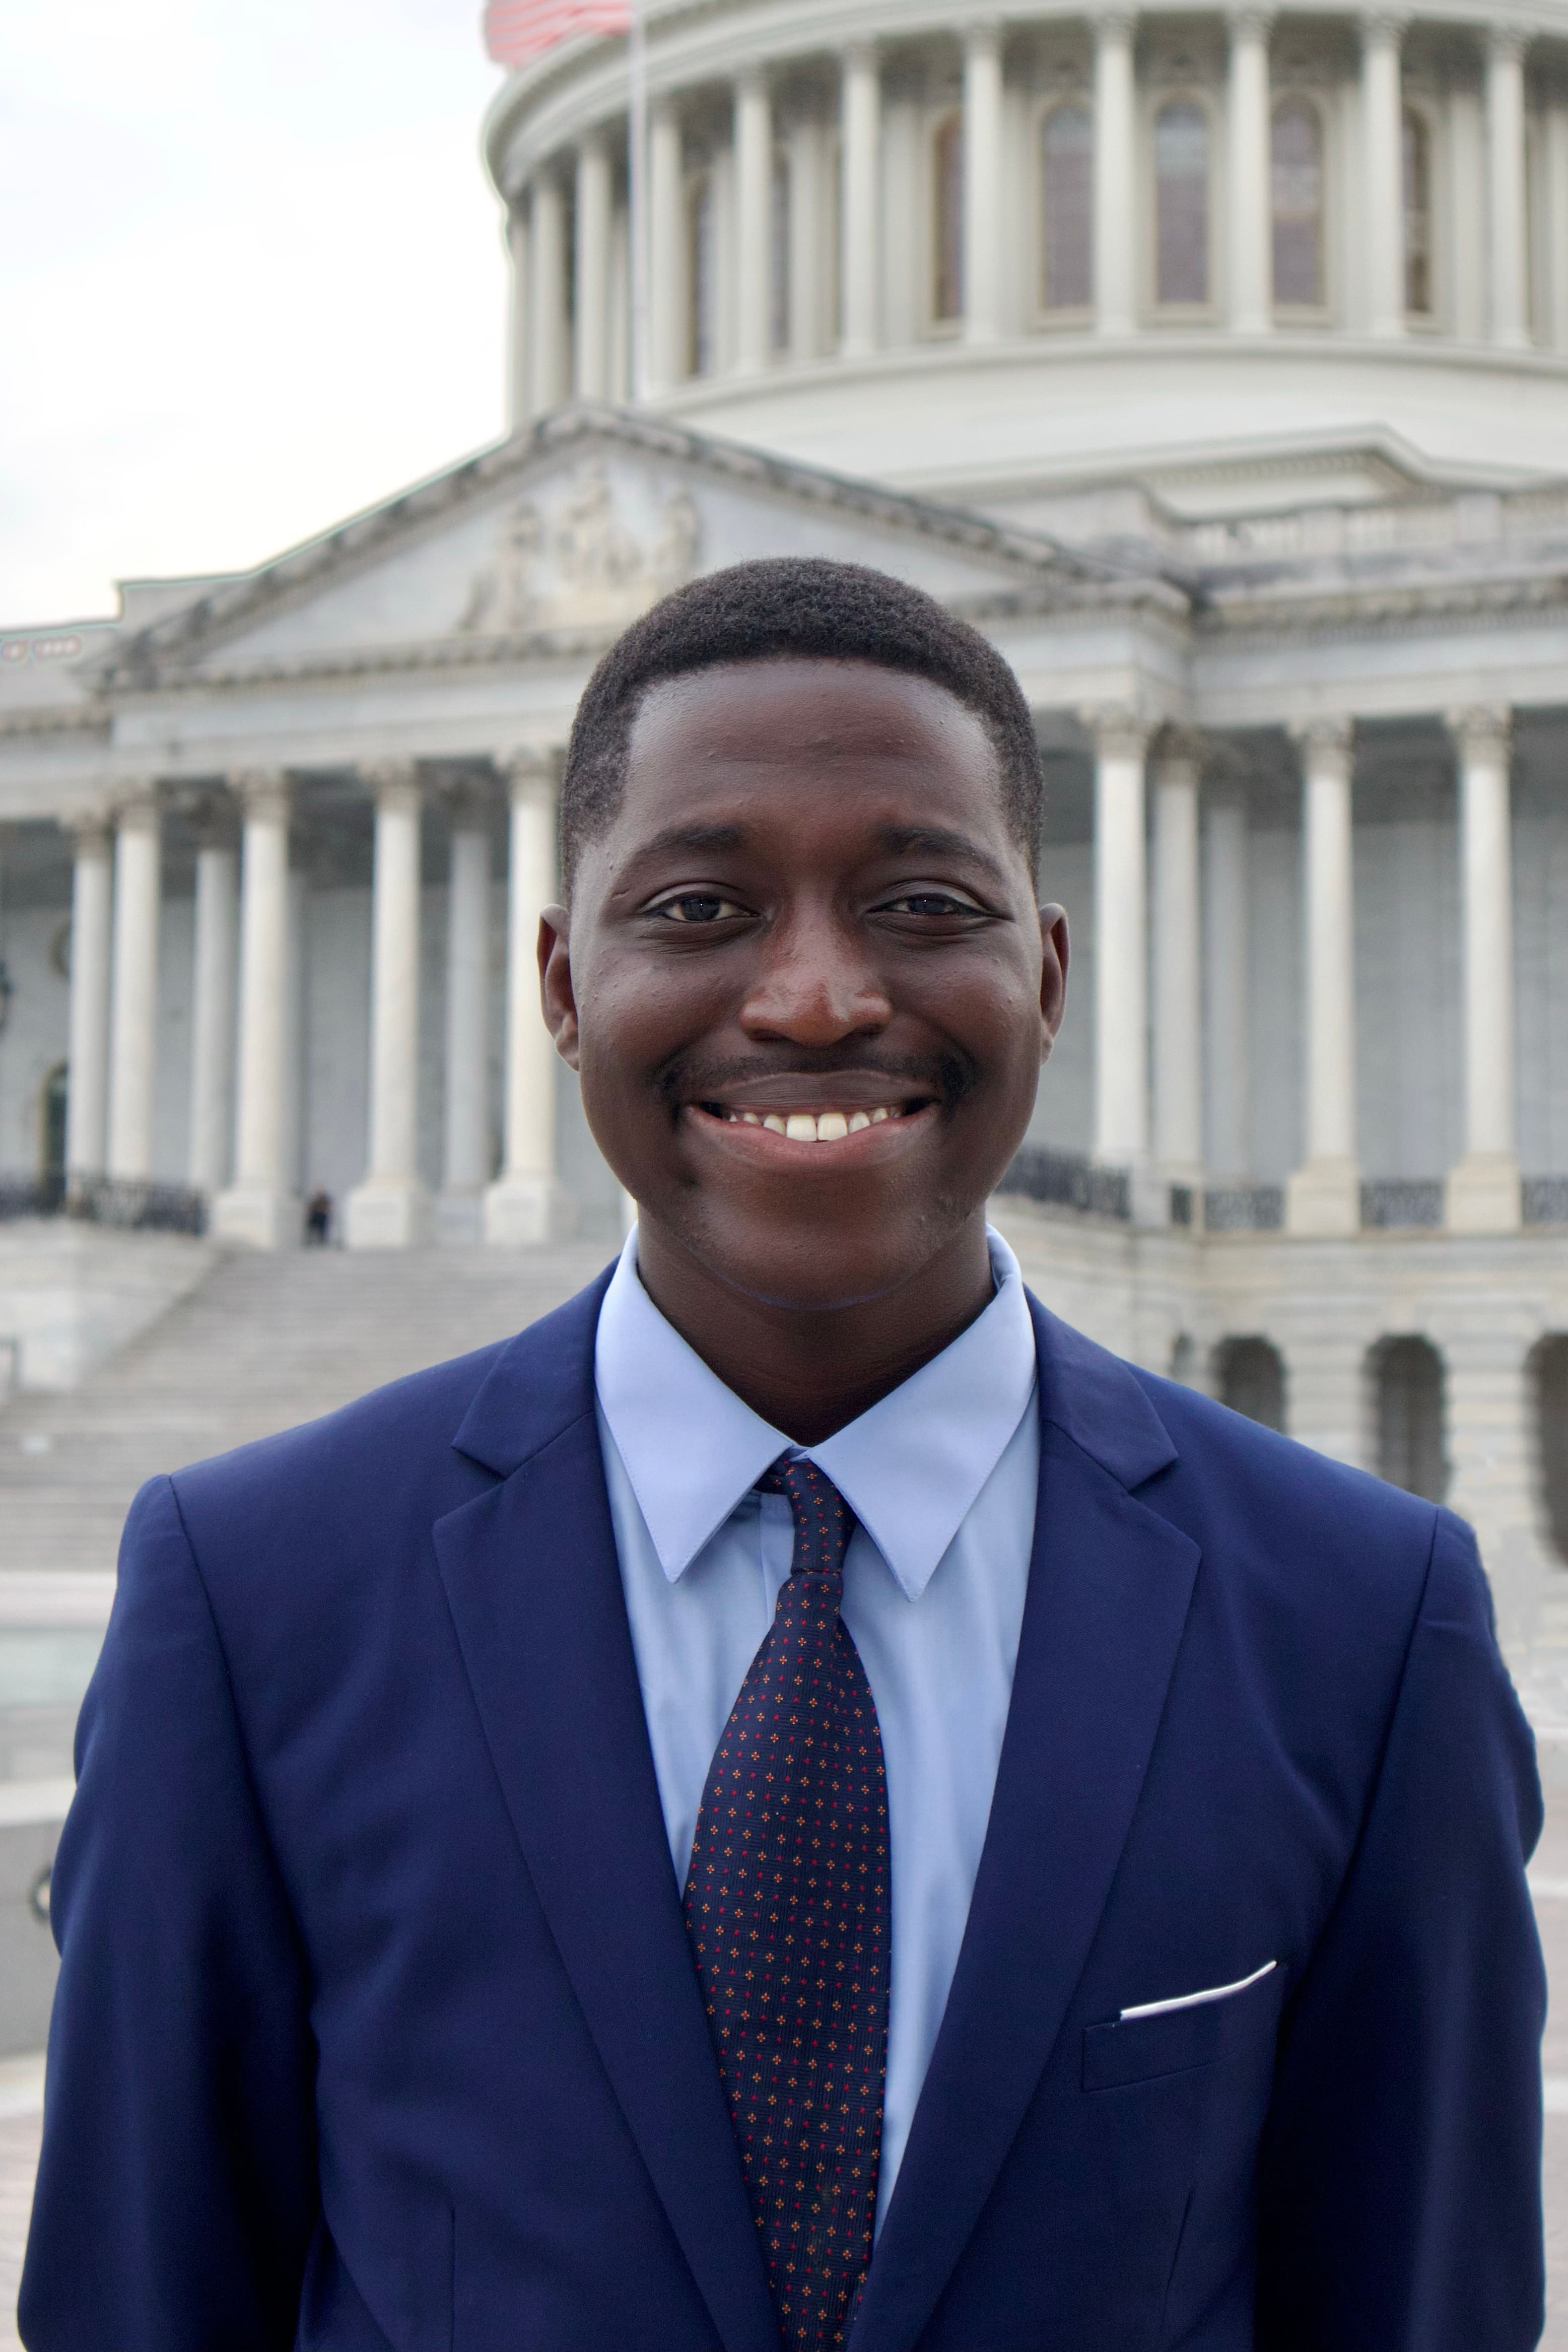 Photo of a man in a suit at the Capitol, smiling